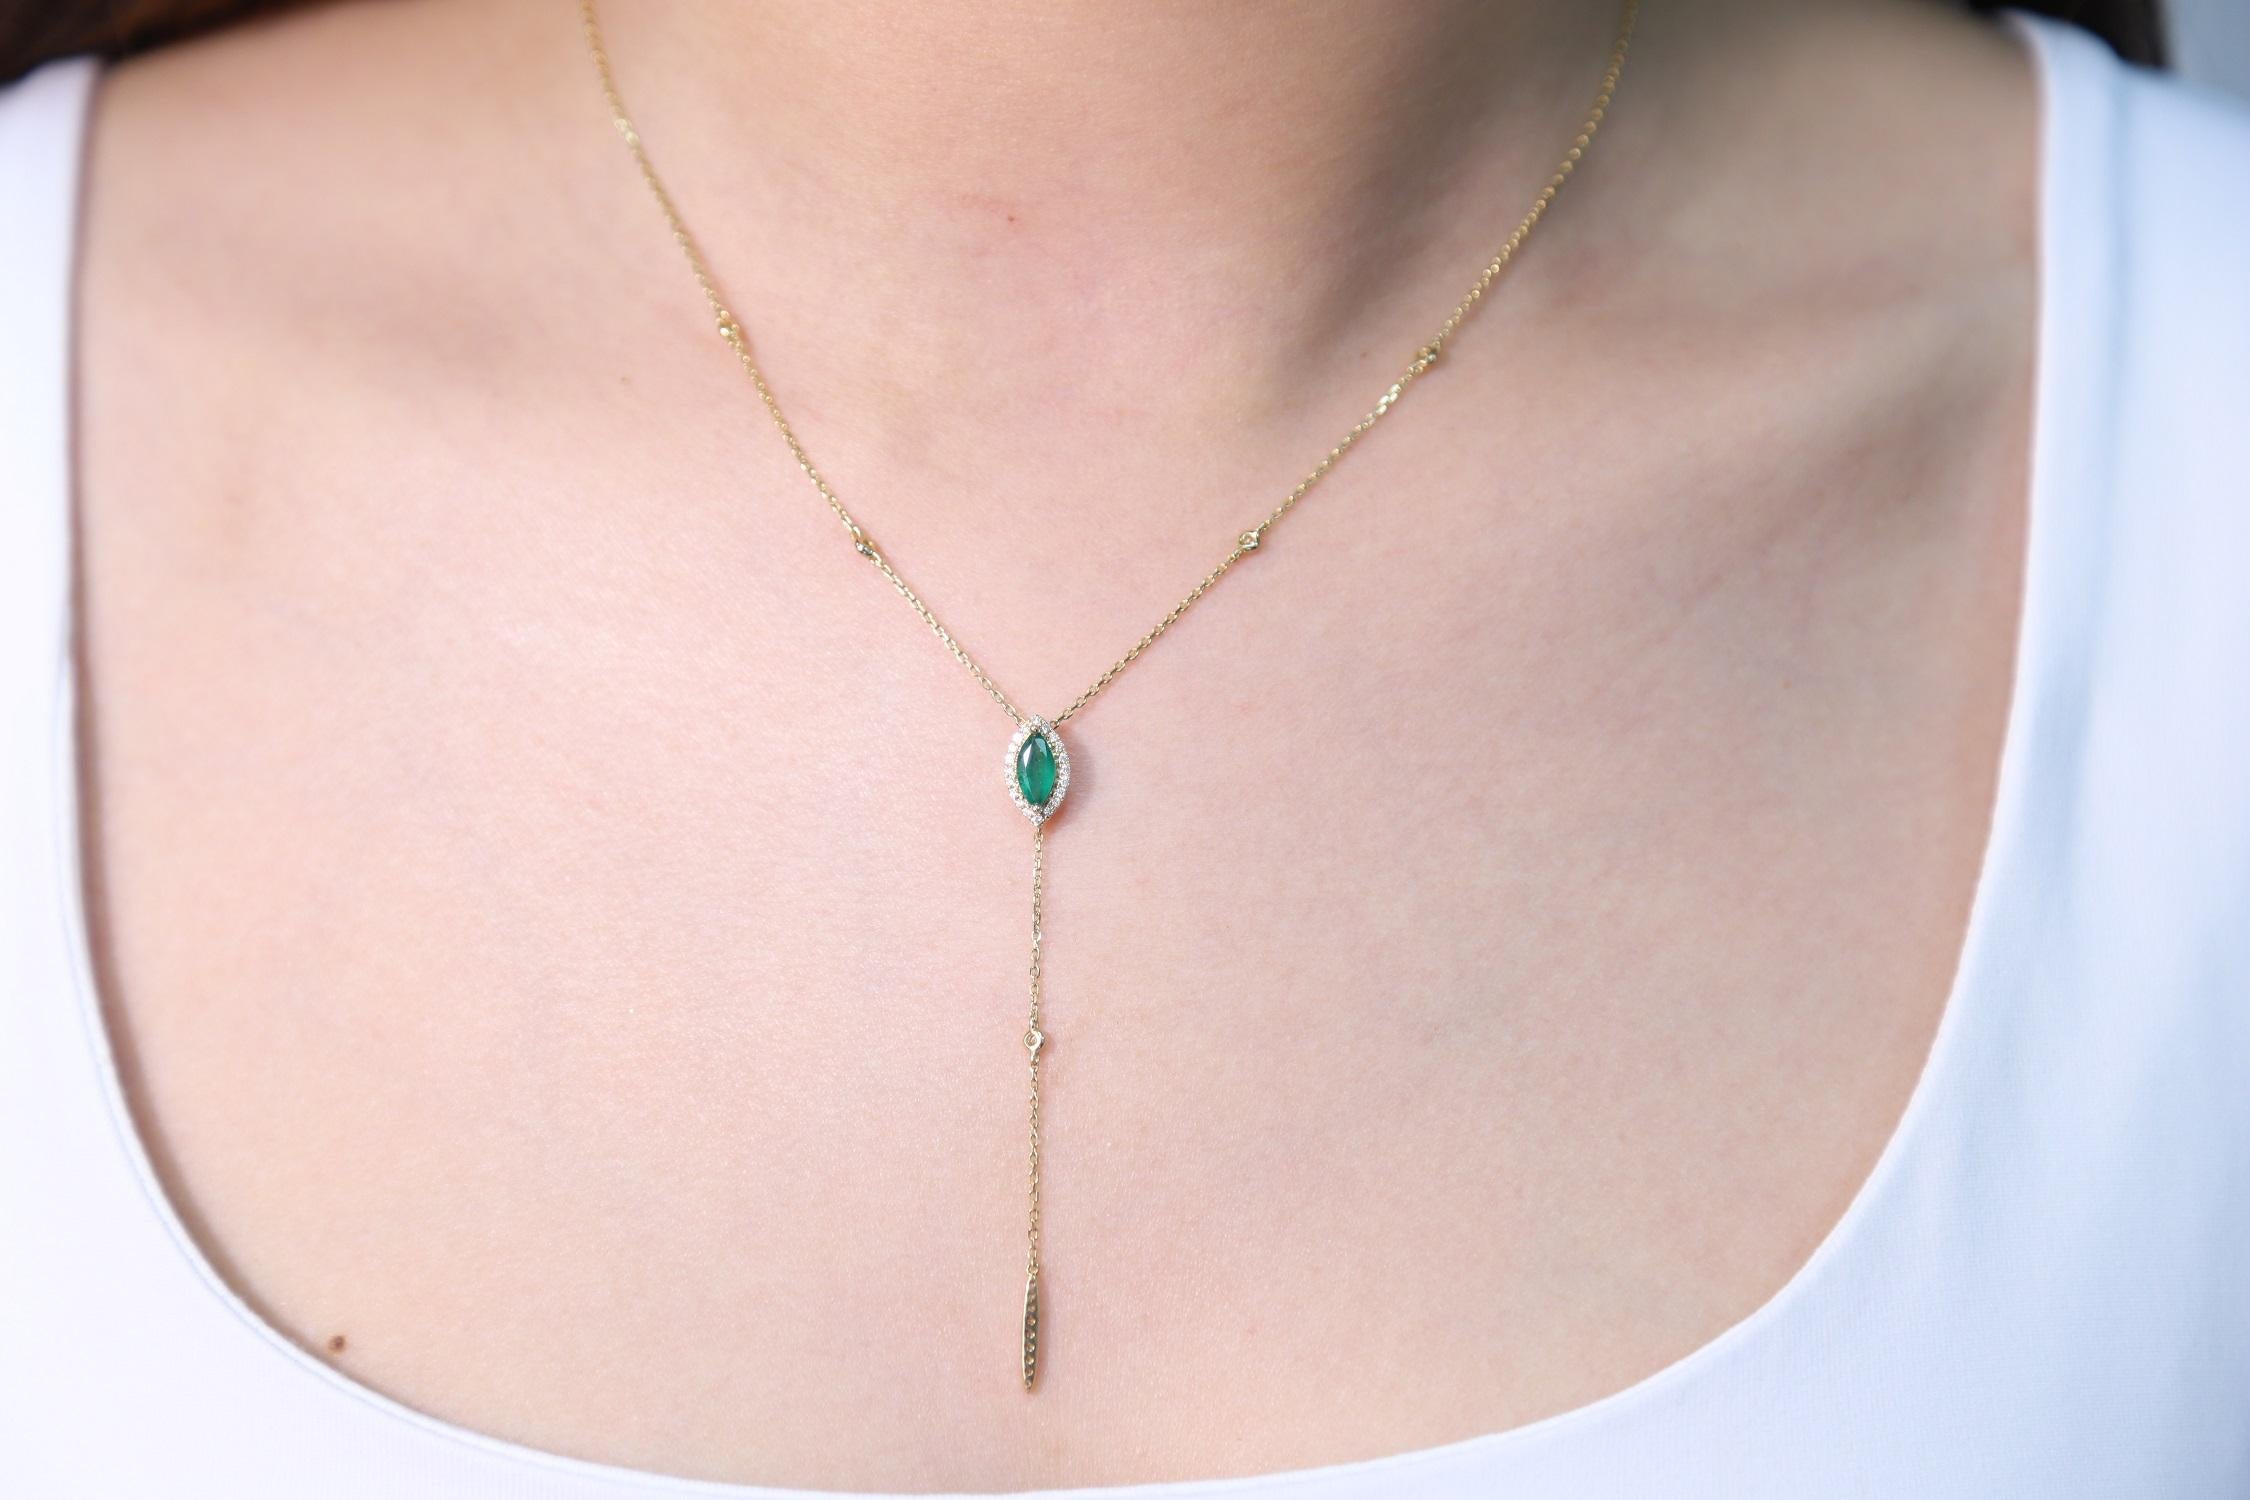 Decorate yourself in elegance with this Pendant is crafted from 14-karat Yellow Gold by Gin & Grace Necklace. This Necklace is made up of 8x4 mm Marquise-Cut Prong setting Emerald (1 Pcs) 0.50 Carat and Round-Cut Prong setting White Diamond (34 Pcs)